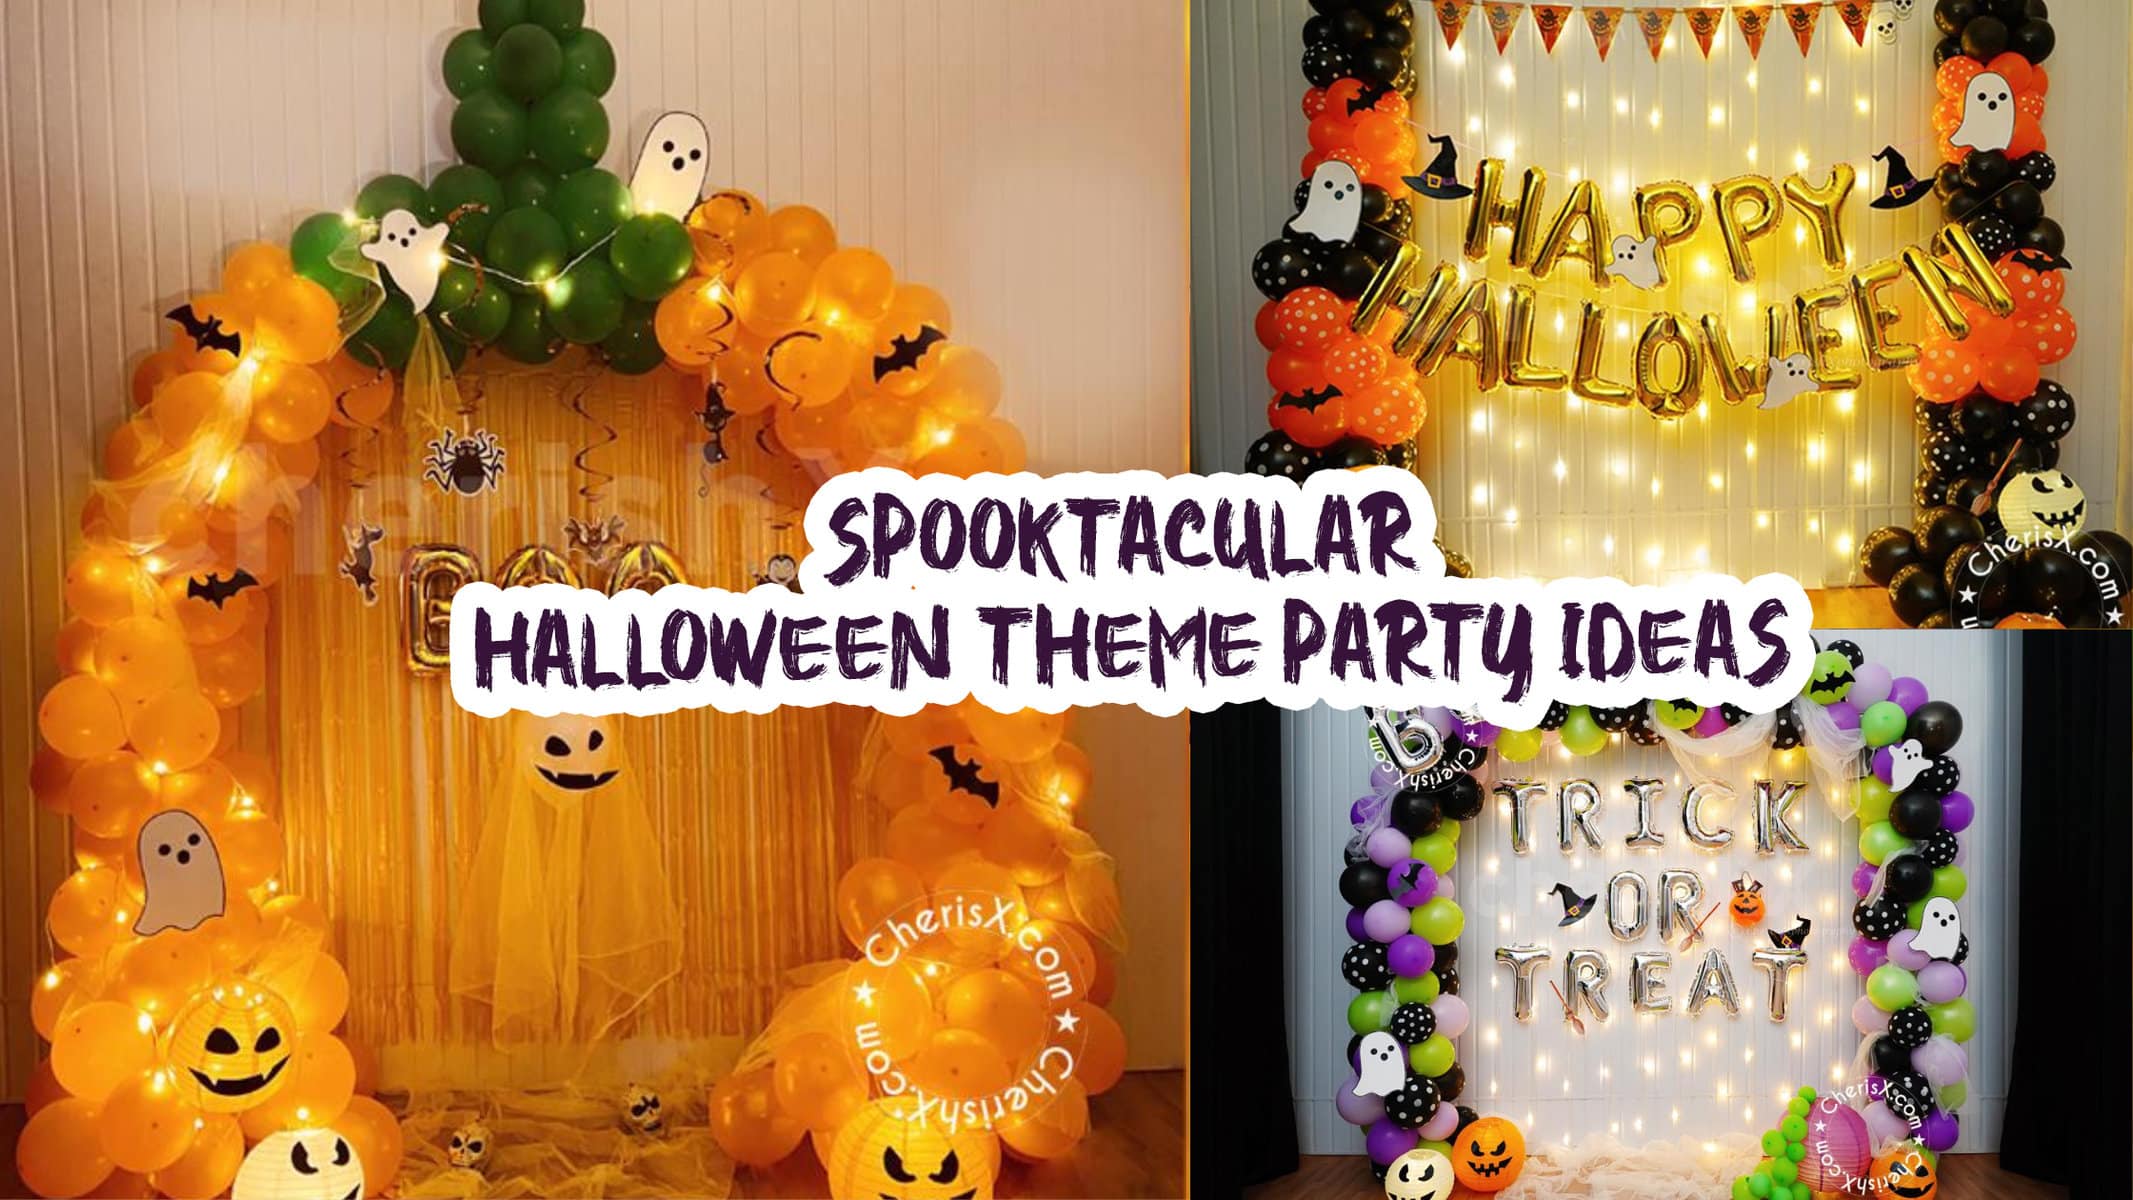 Setup a Halloween Theme Party at Home- Complete Guide 2022 | Decorations, Costumes, Activities